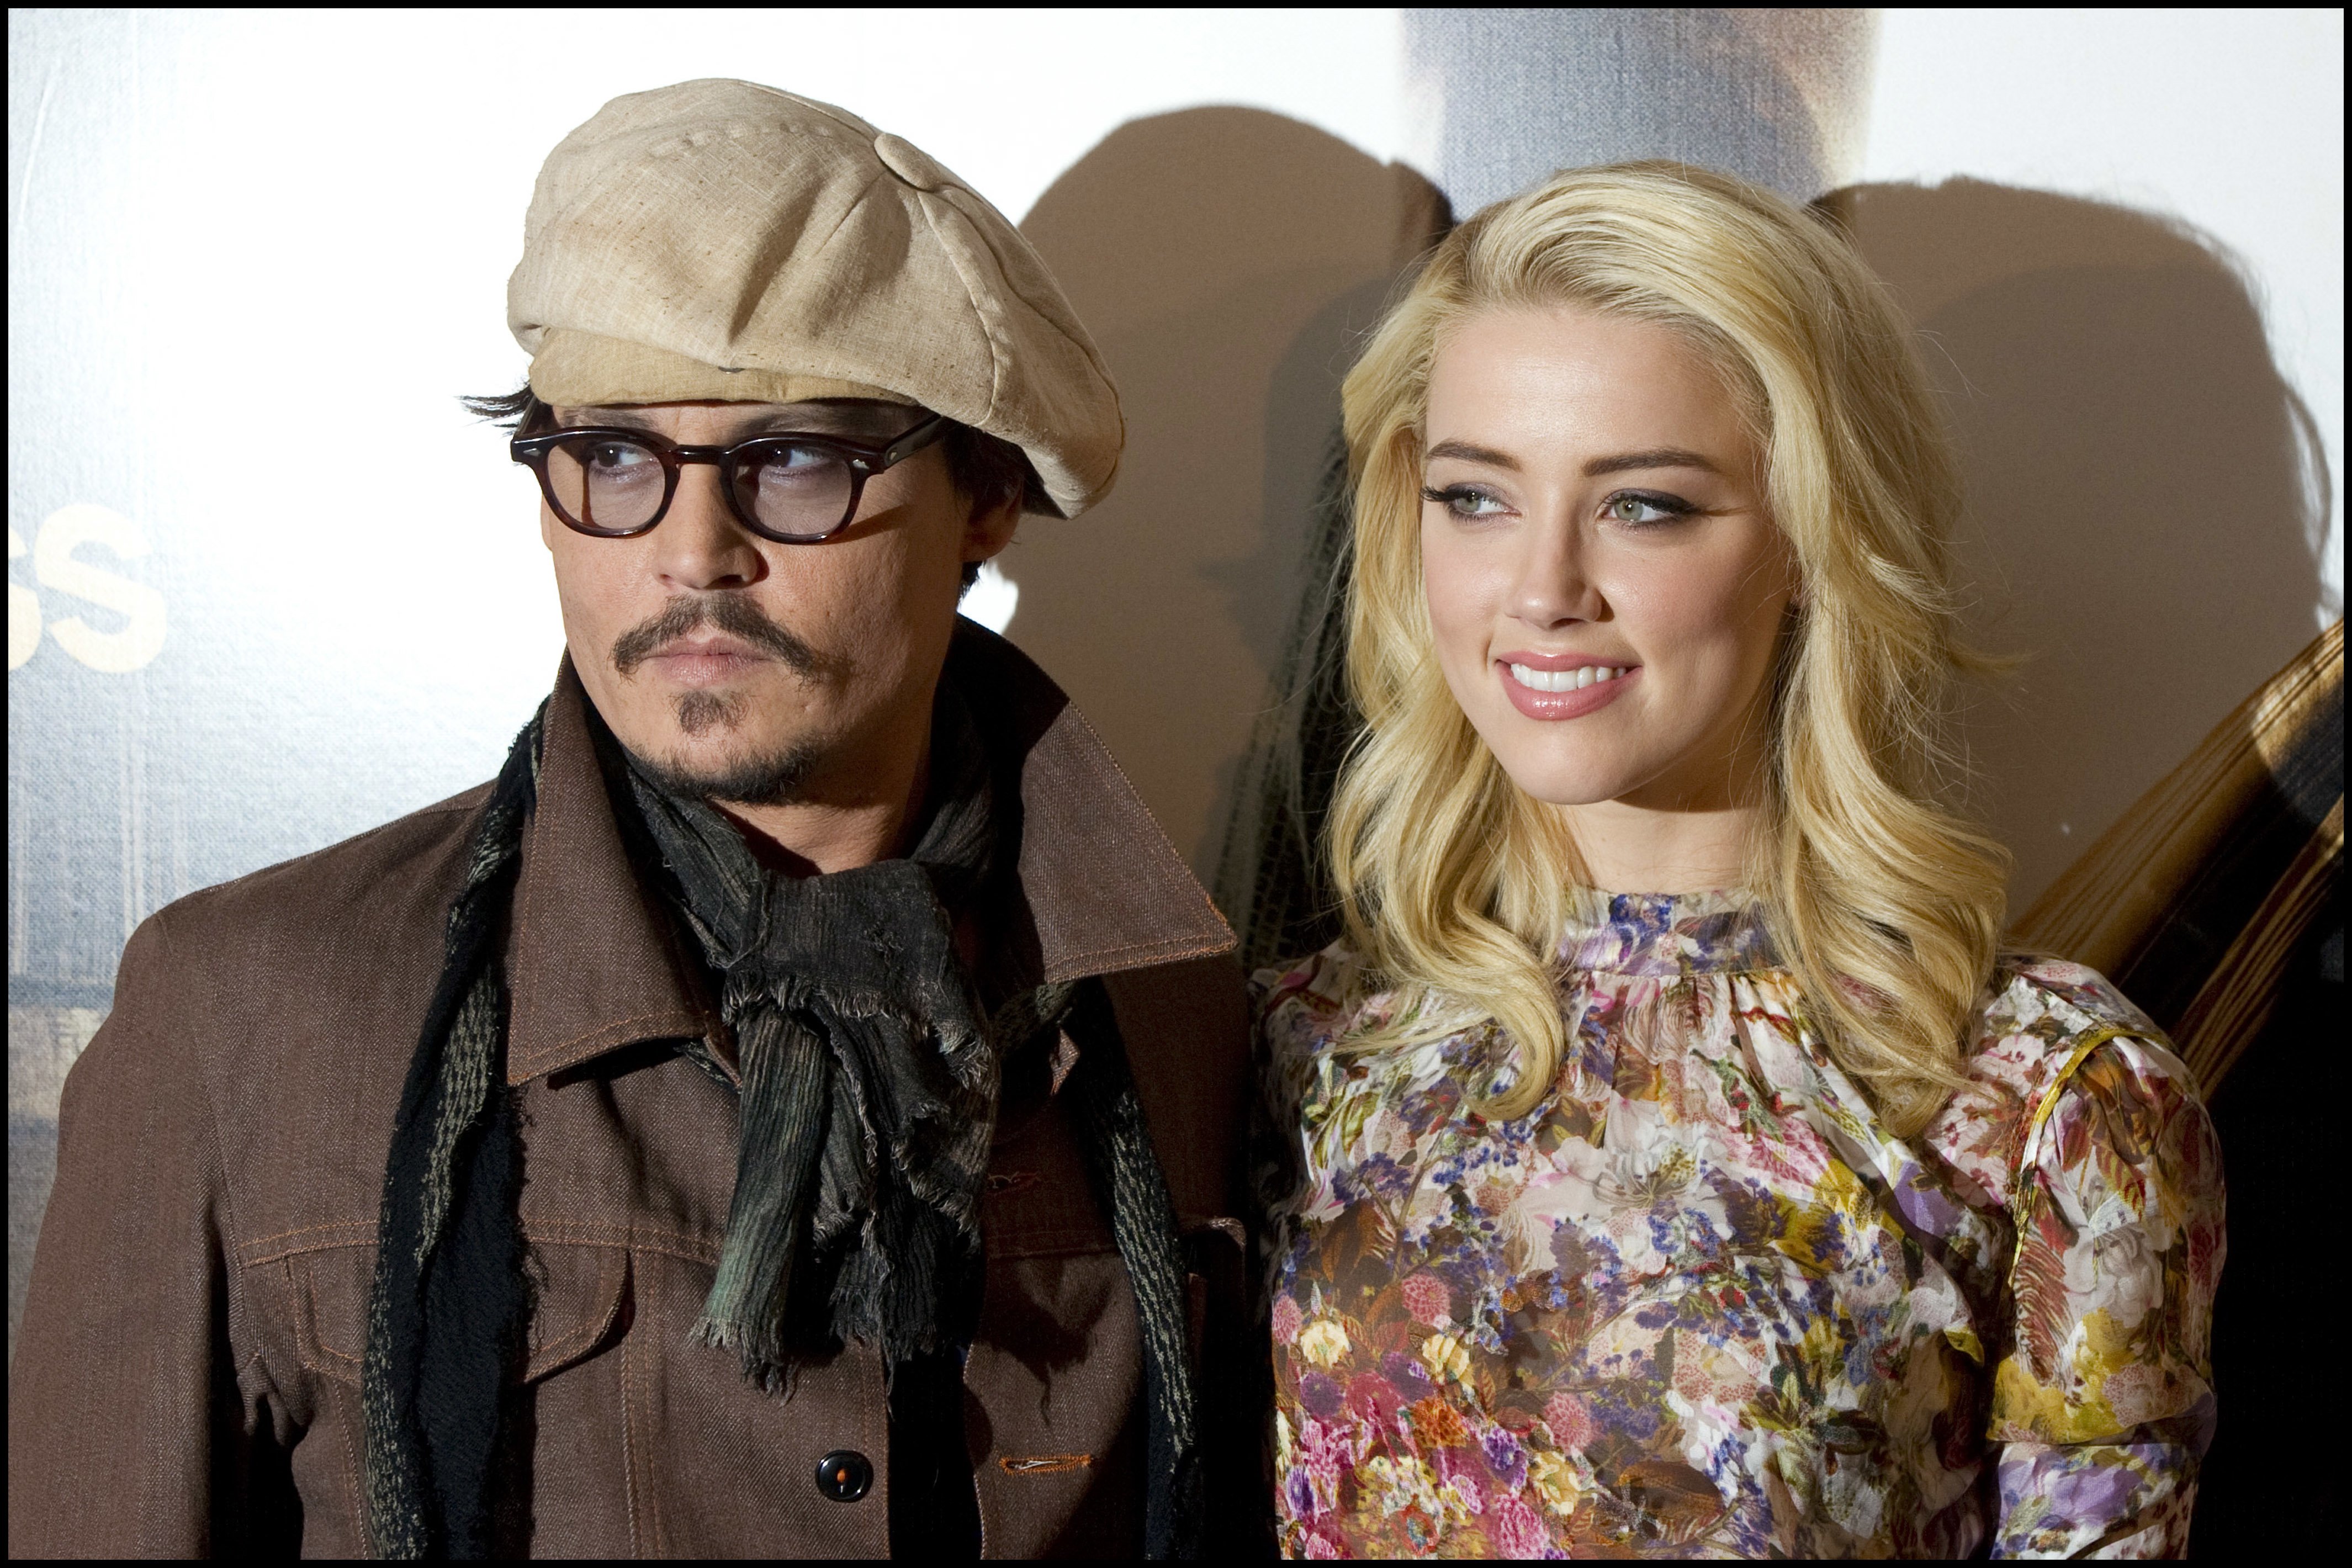 Johnny Depp and Amber Heard in Paris for the photocall of "The Rum Diary" on November 8, 2011 | Source: Getty Images